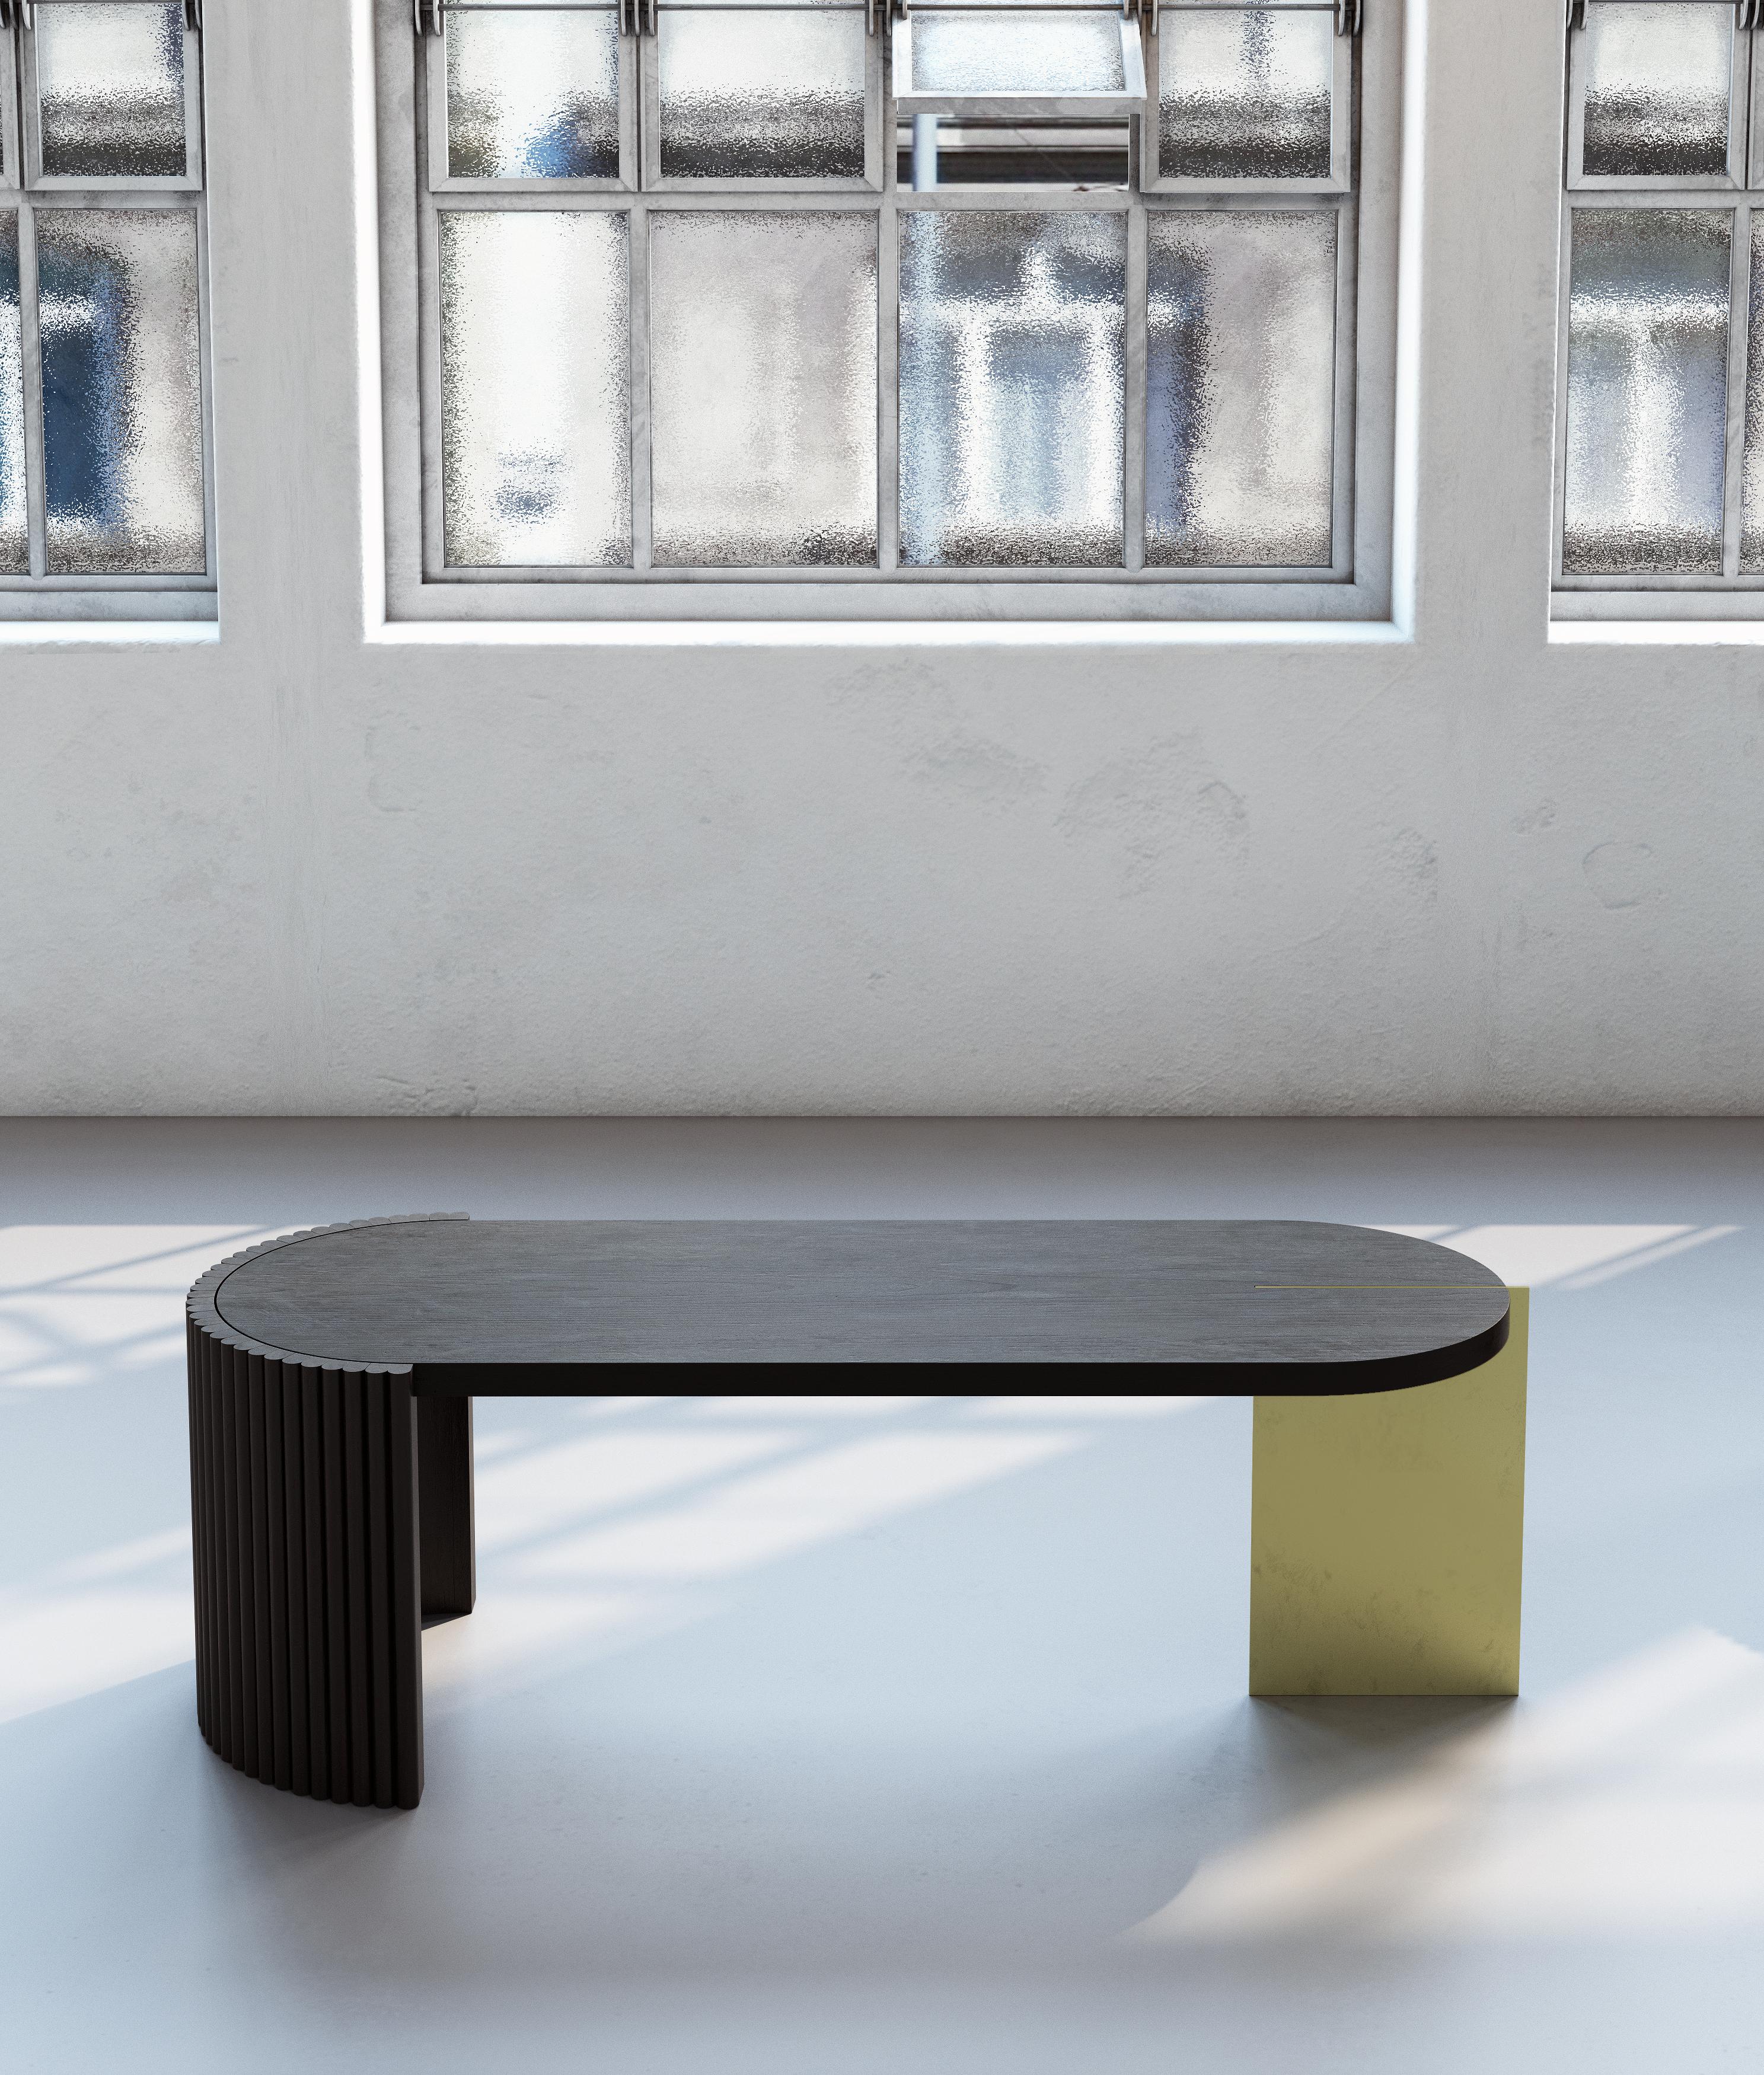 Minus coffee table by Buket Hos¸can Bazman
2019
Dimensions: W 120, D 42, H 45 cm
Material: Sandblasted oakwood, hammered brass

Buket Hoscan Bazman was born in Izmir, Turkey, in 1989. Graduated at the Isik University and after few years of